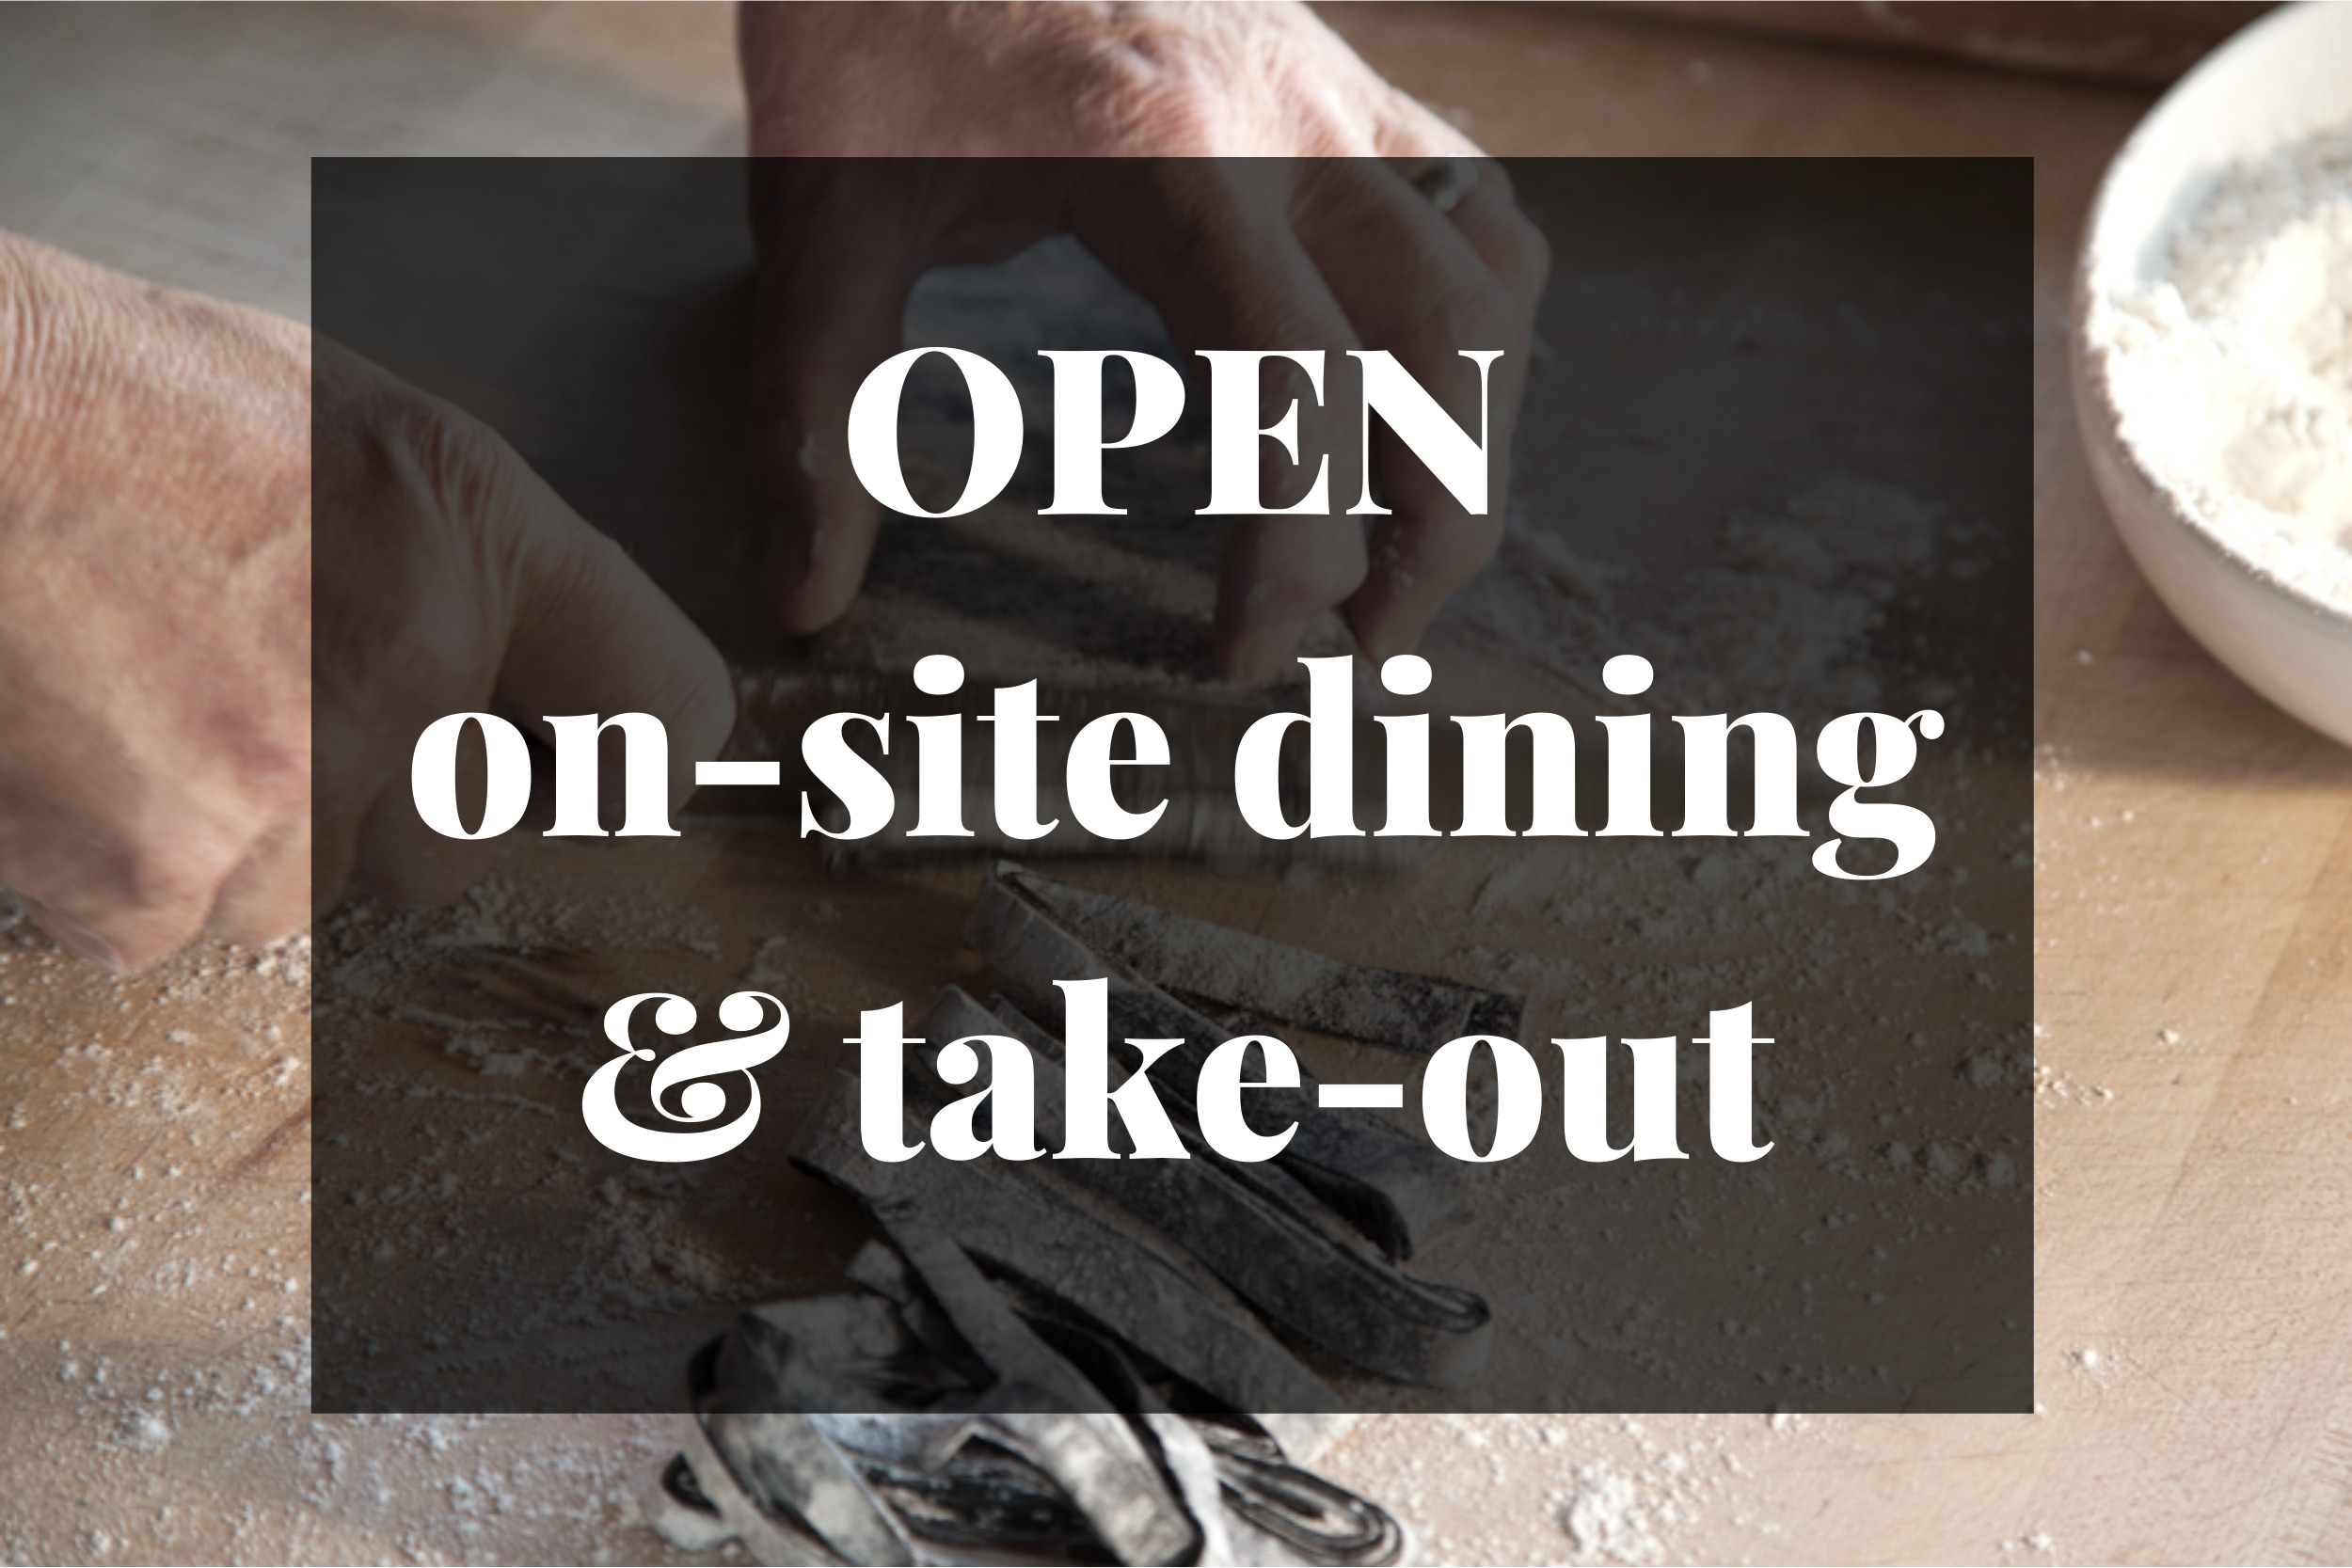 Open for on-site dining and take-out